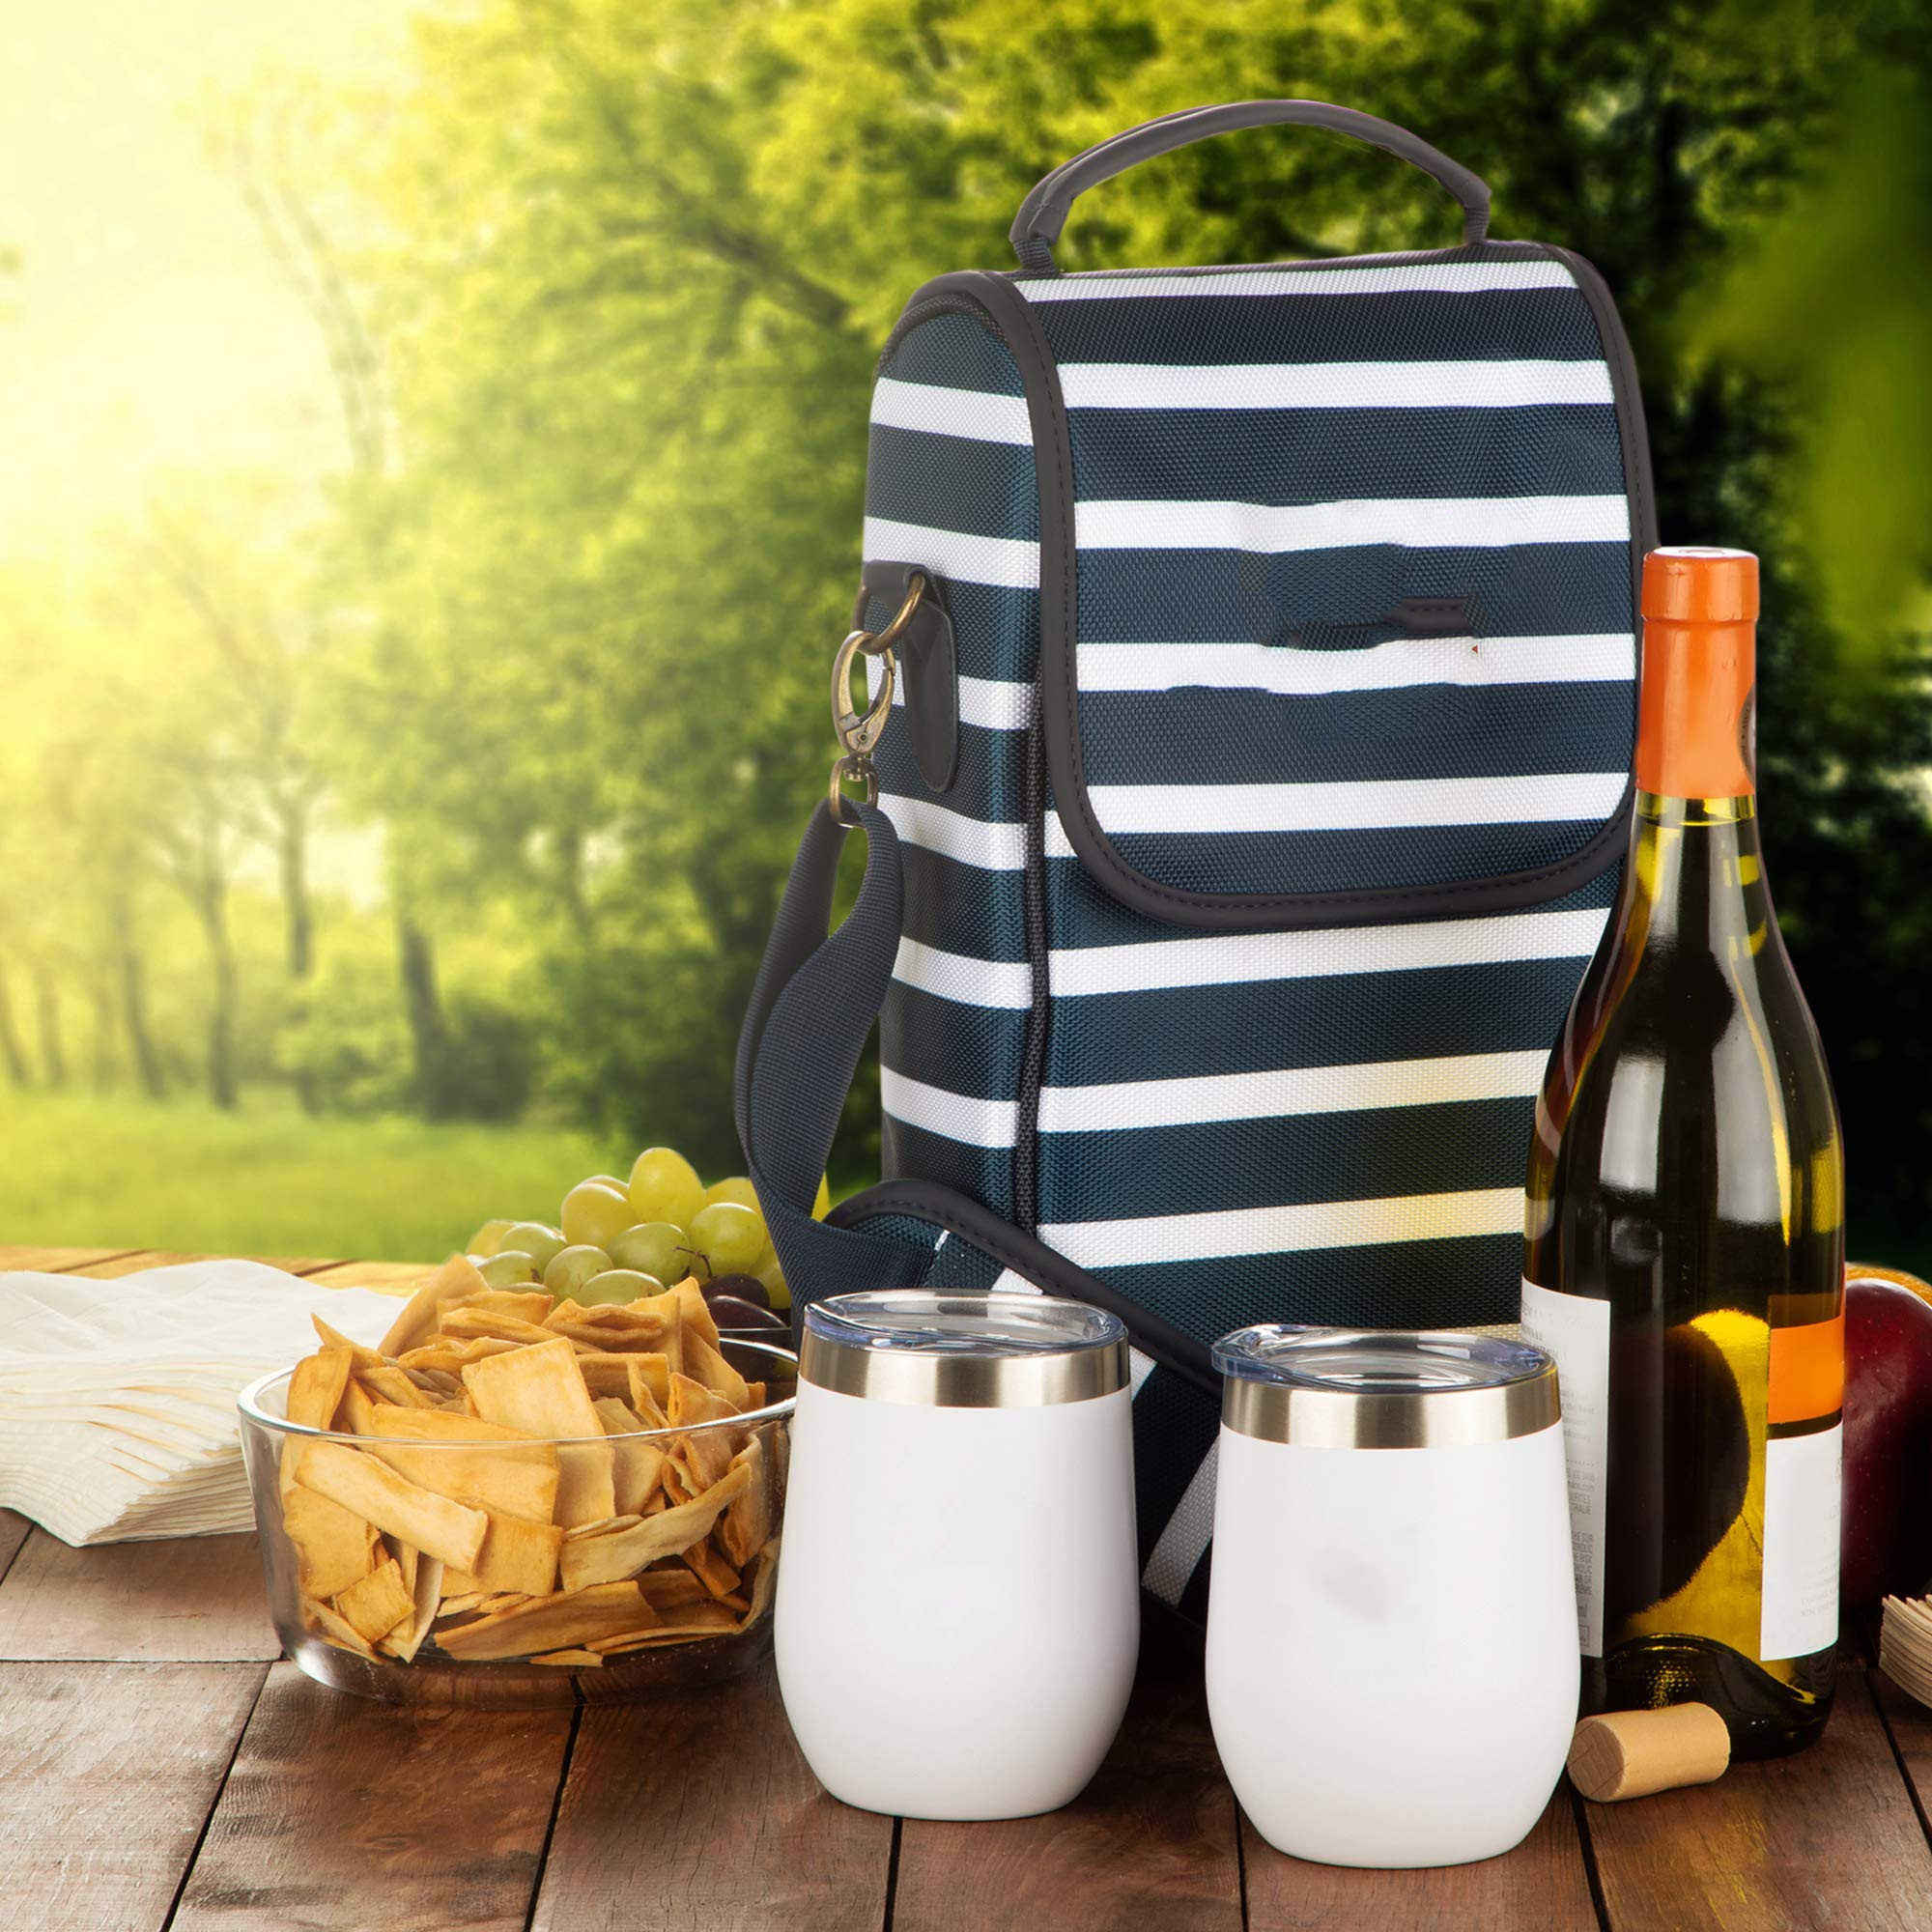 Wholesale 2 bottles Insulated Portable cooler Wine Carrier Bag Case Water Resistant Tote wine thermal Bags for Women men